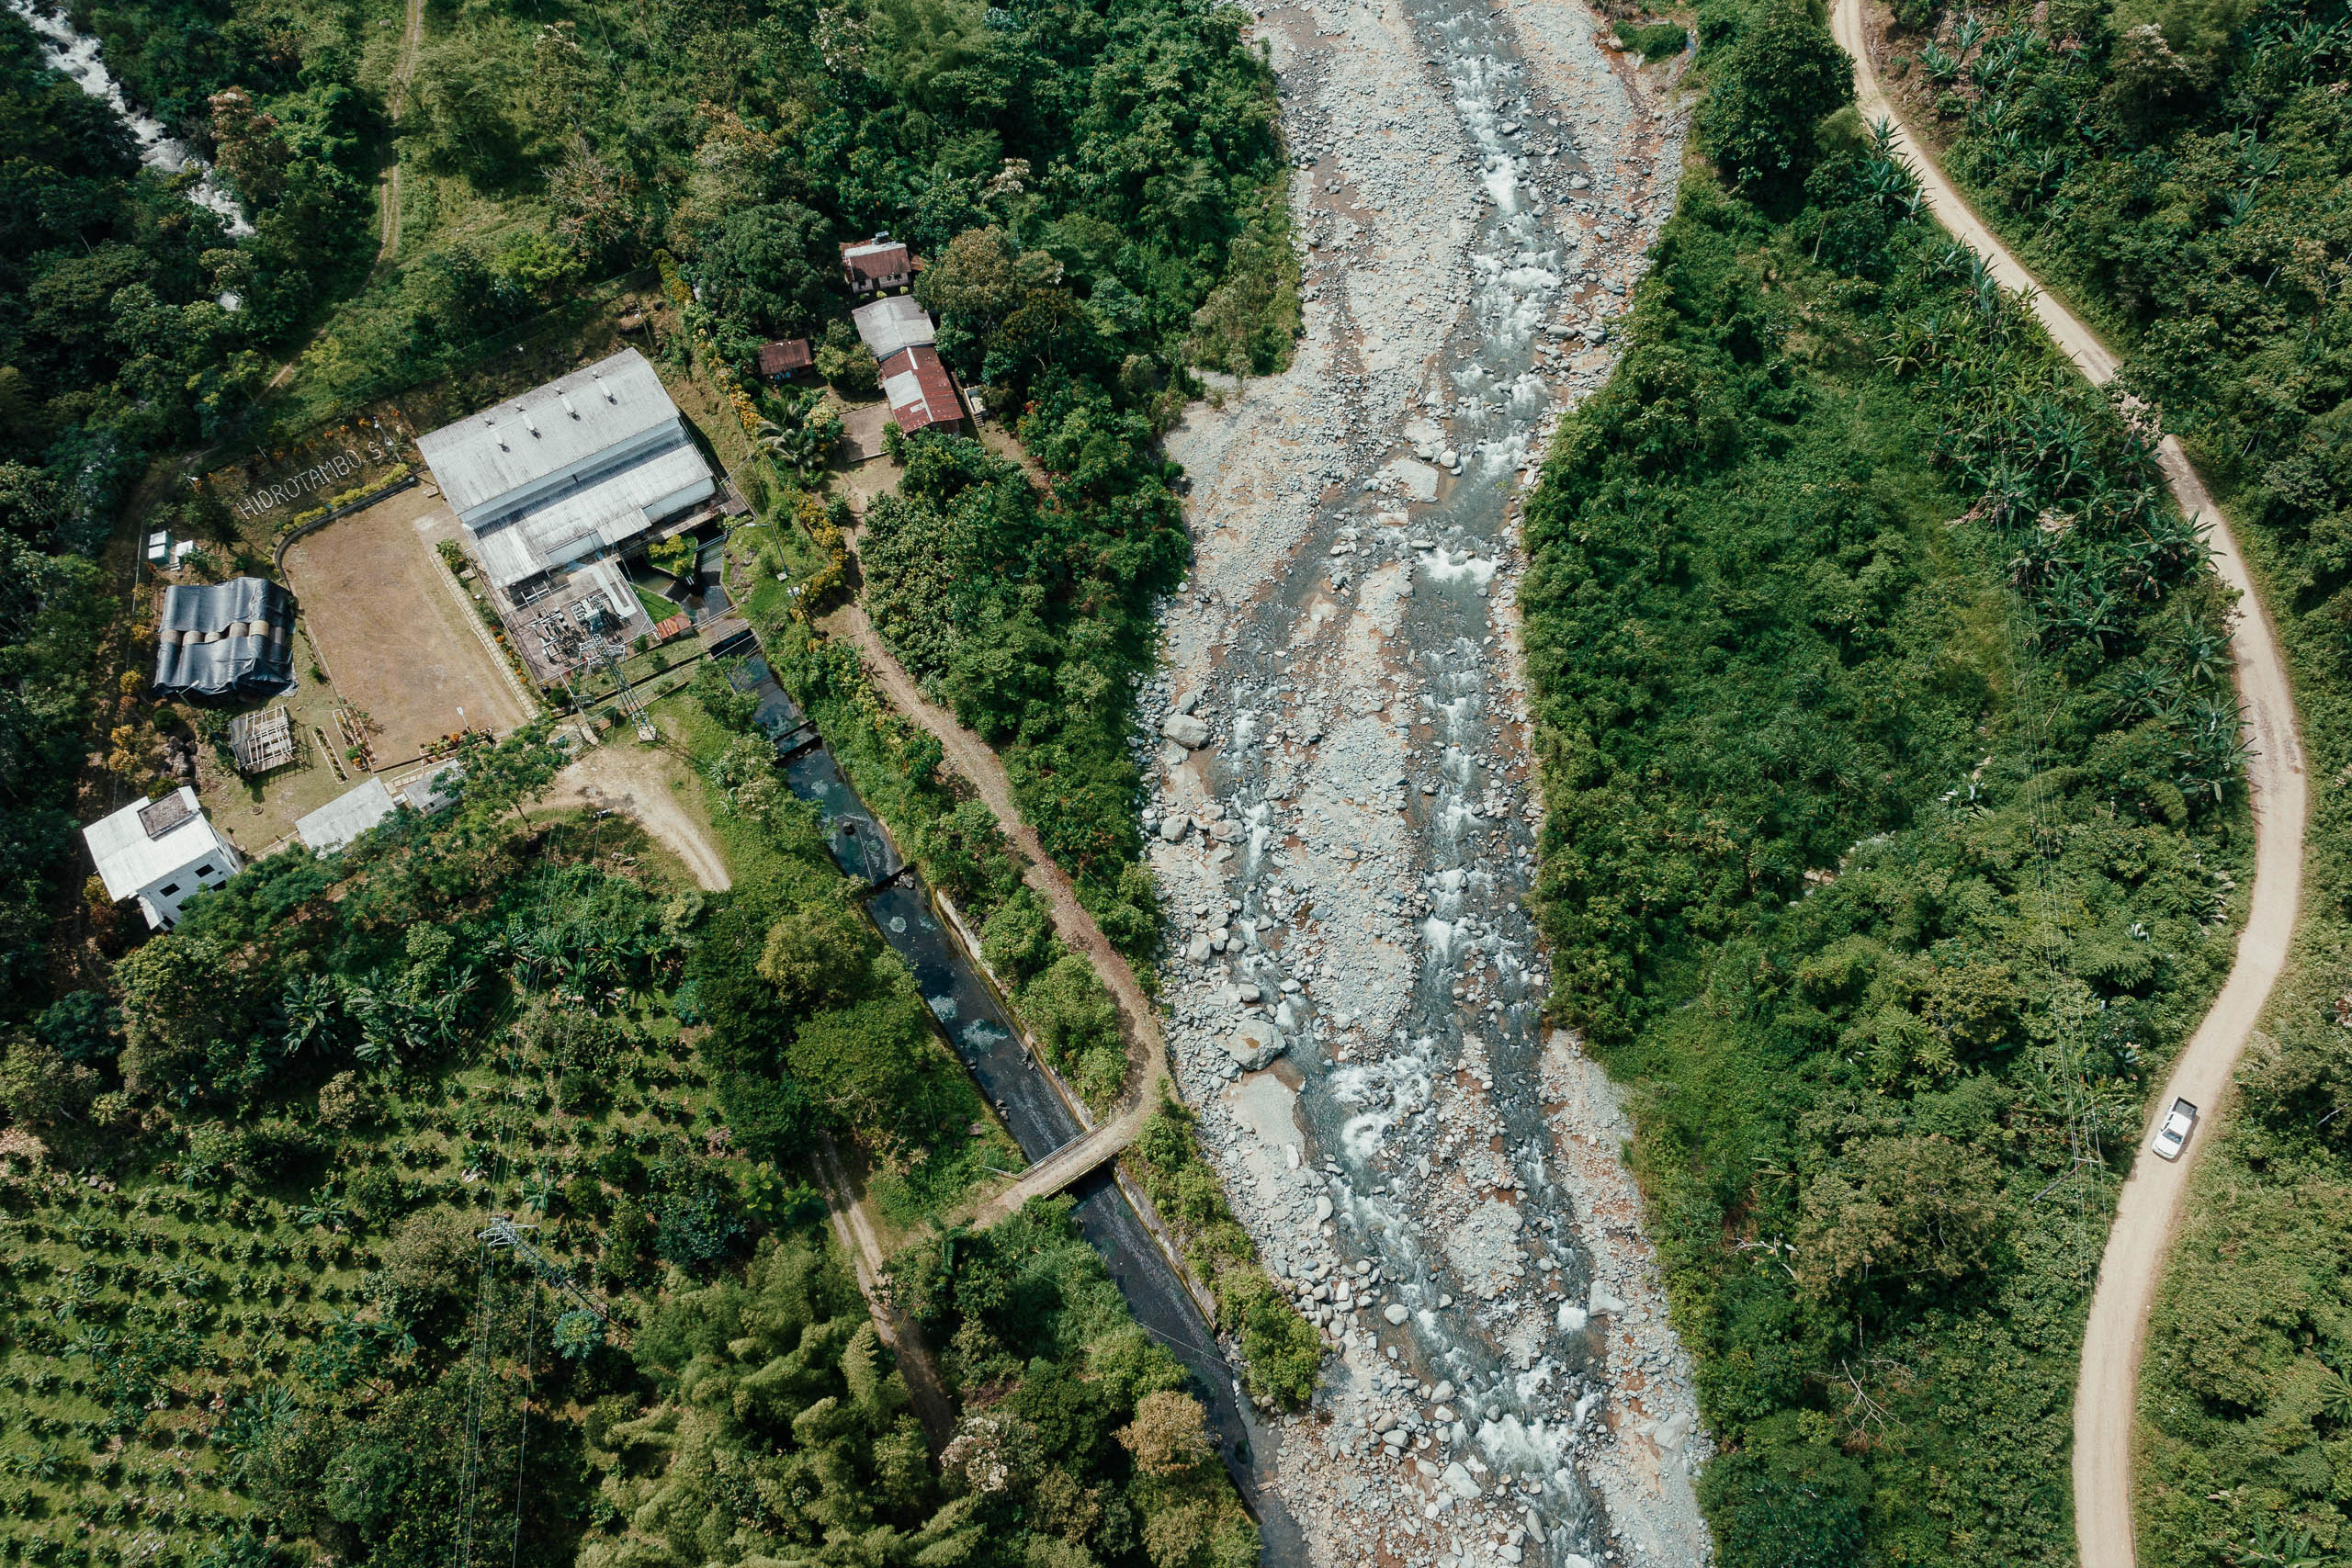 <p>An aerial view of the San José del Tambo hydroelectric plant (left) and the Dulcepamba River in Bolívar province, Ecuador (Image: Misha Vallejo Prut)</p>